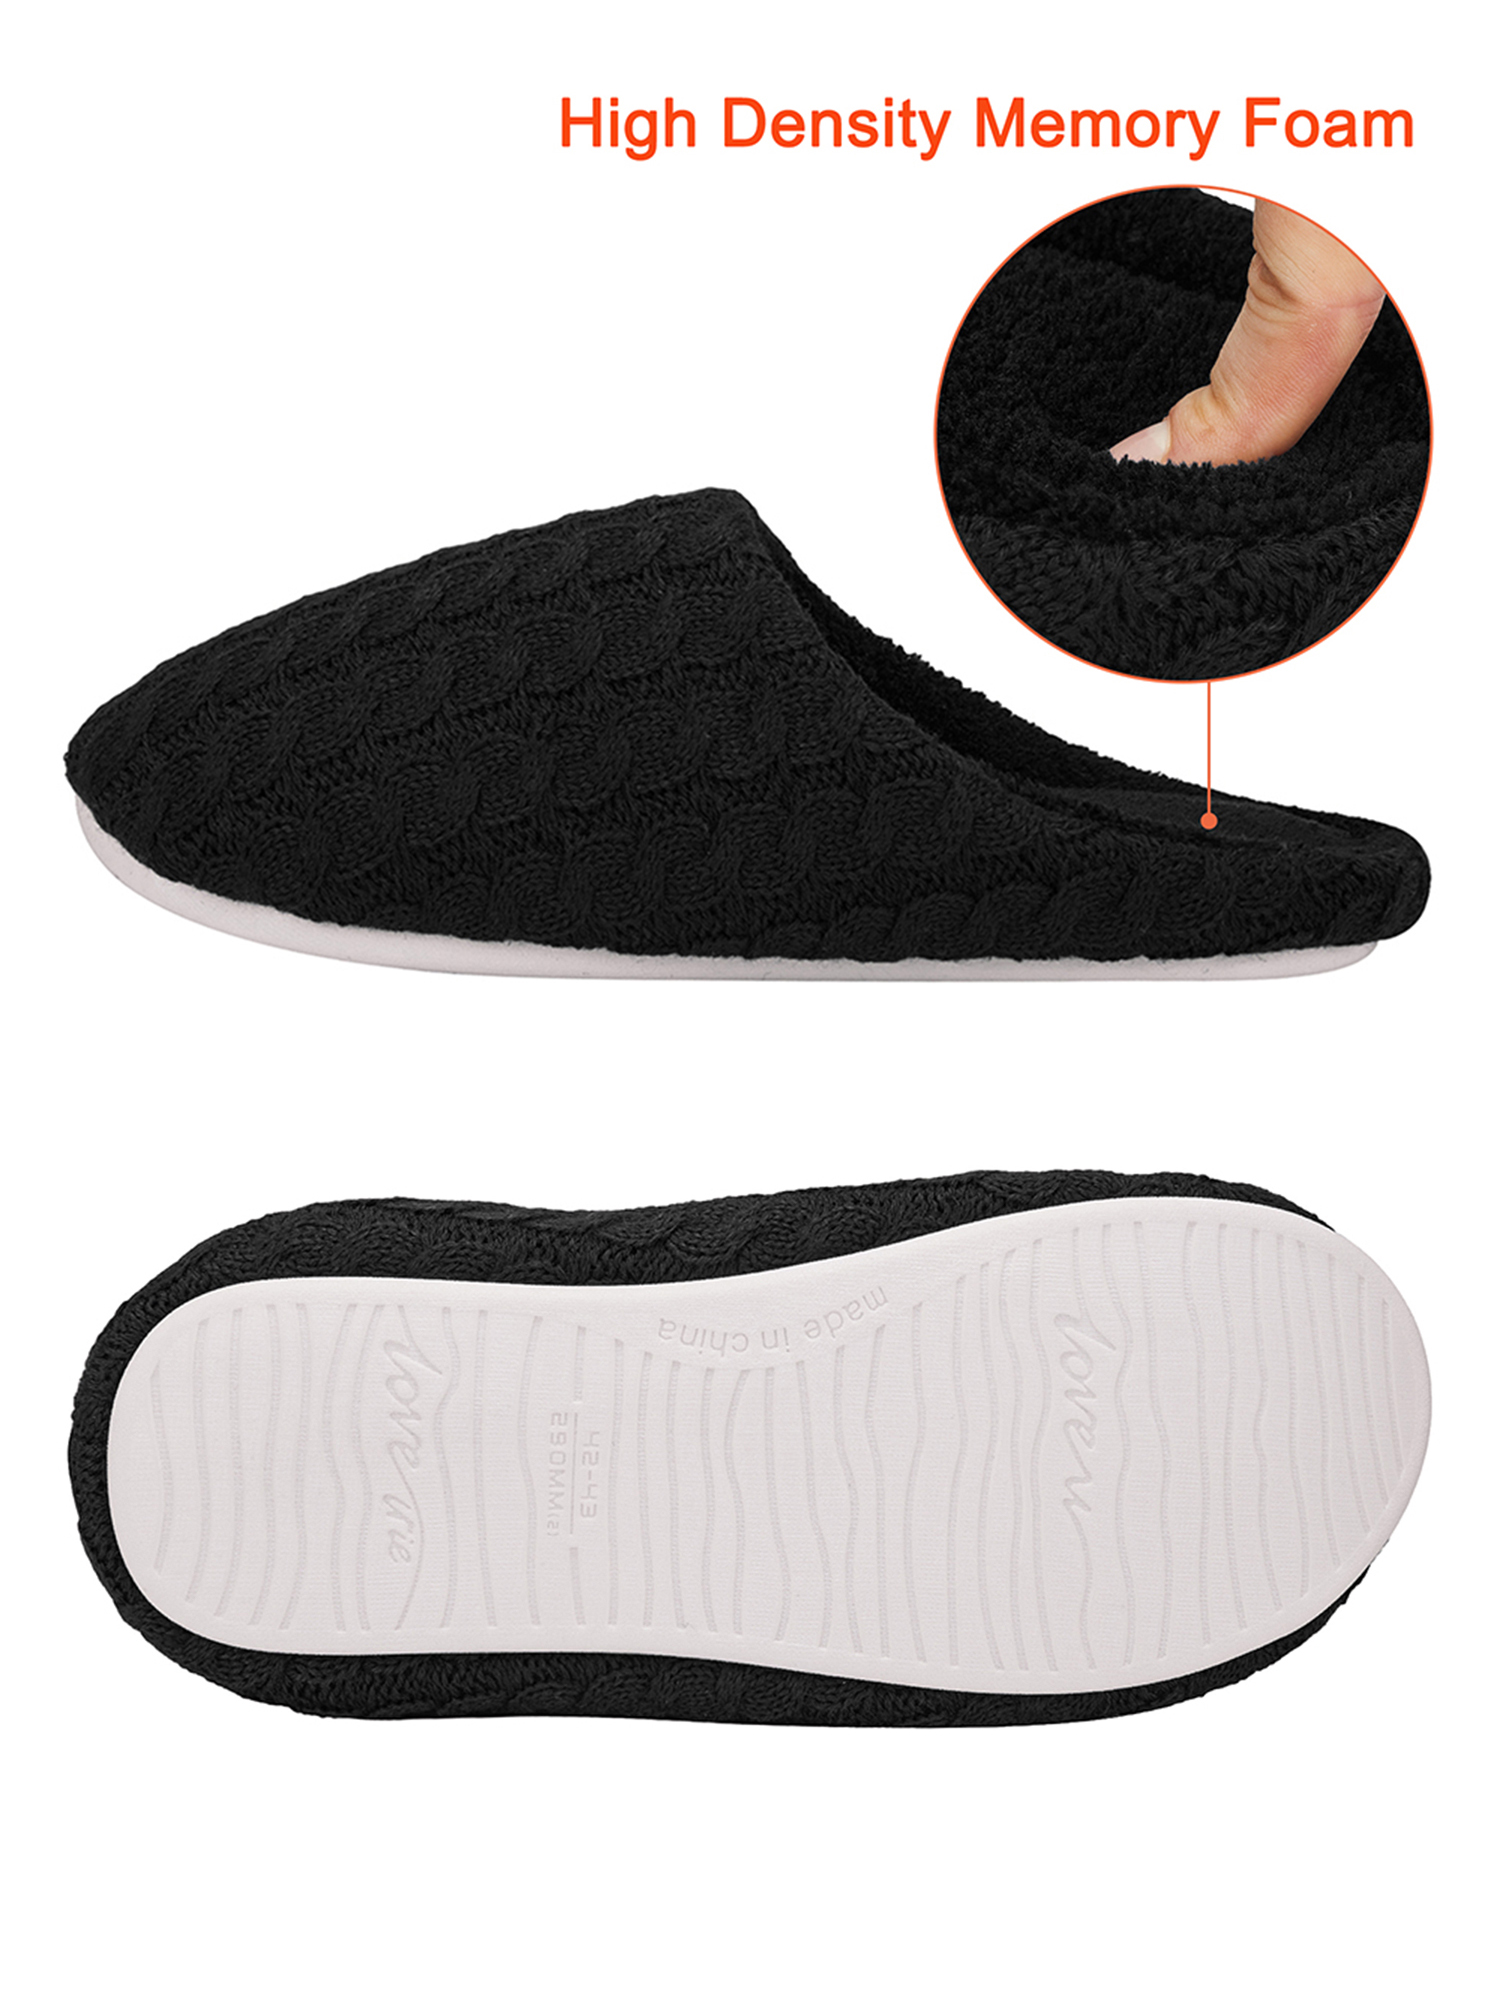 SAYFUT Men's and Women's Memory Foam House Slippers Soft Sole Cotton Comfortable Indoor Slid Slippers Slip Ons Mens Slide Slippers Shoes - image 2 of 8